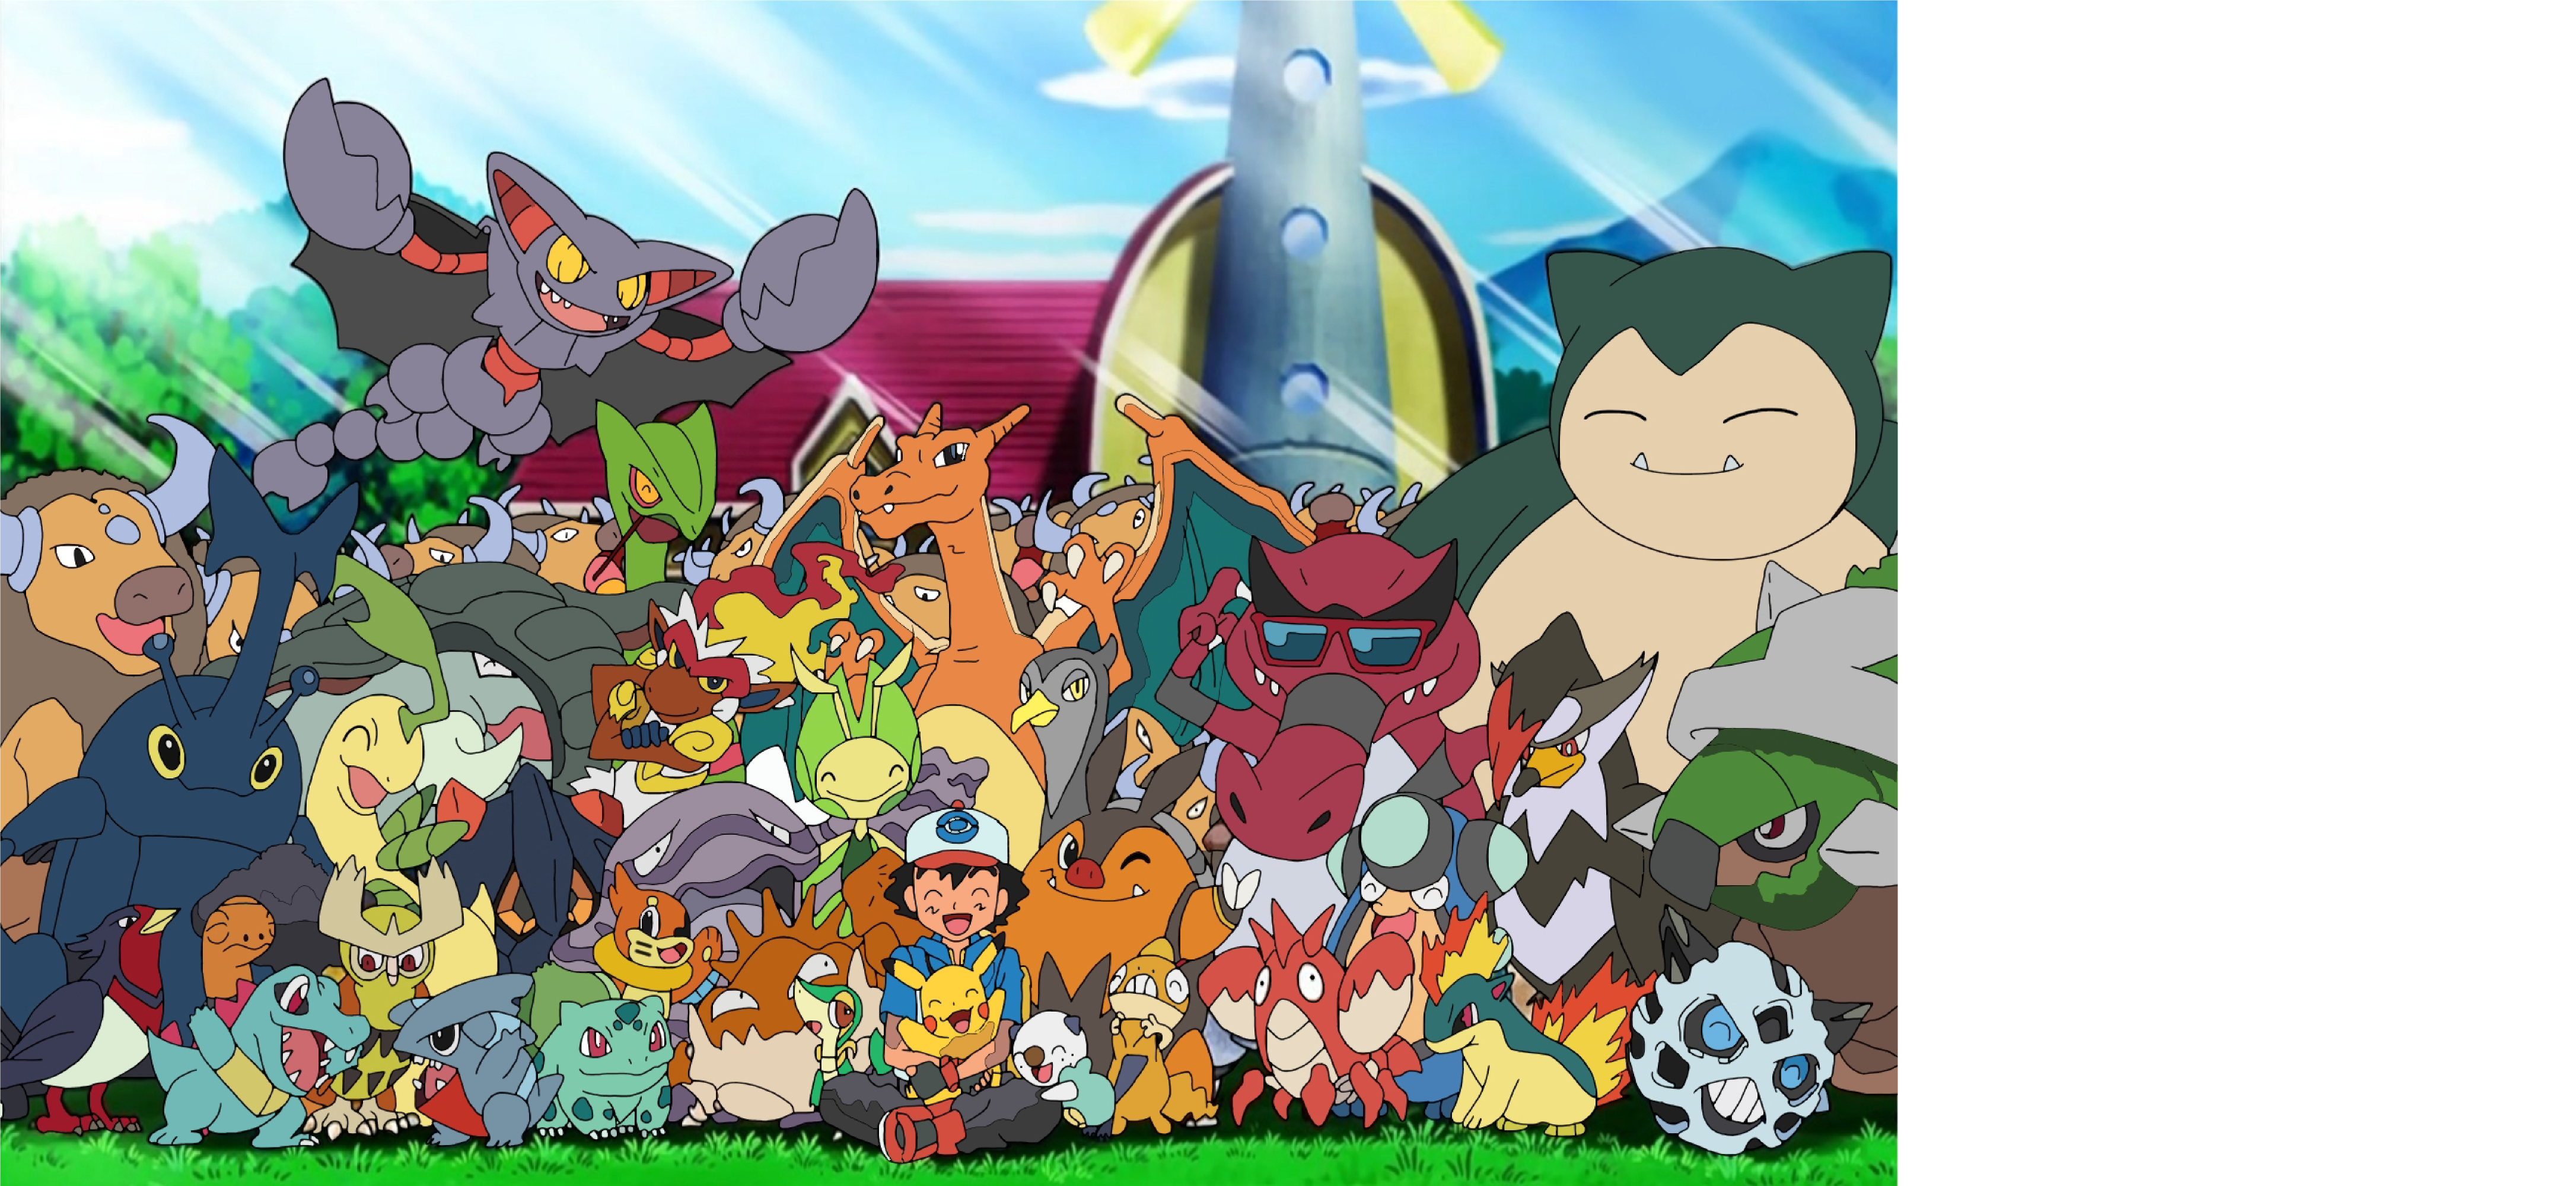 the pokemon squad was born because of a hobby